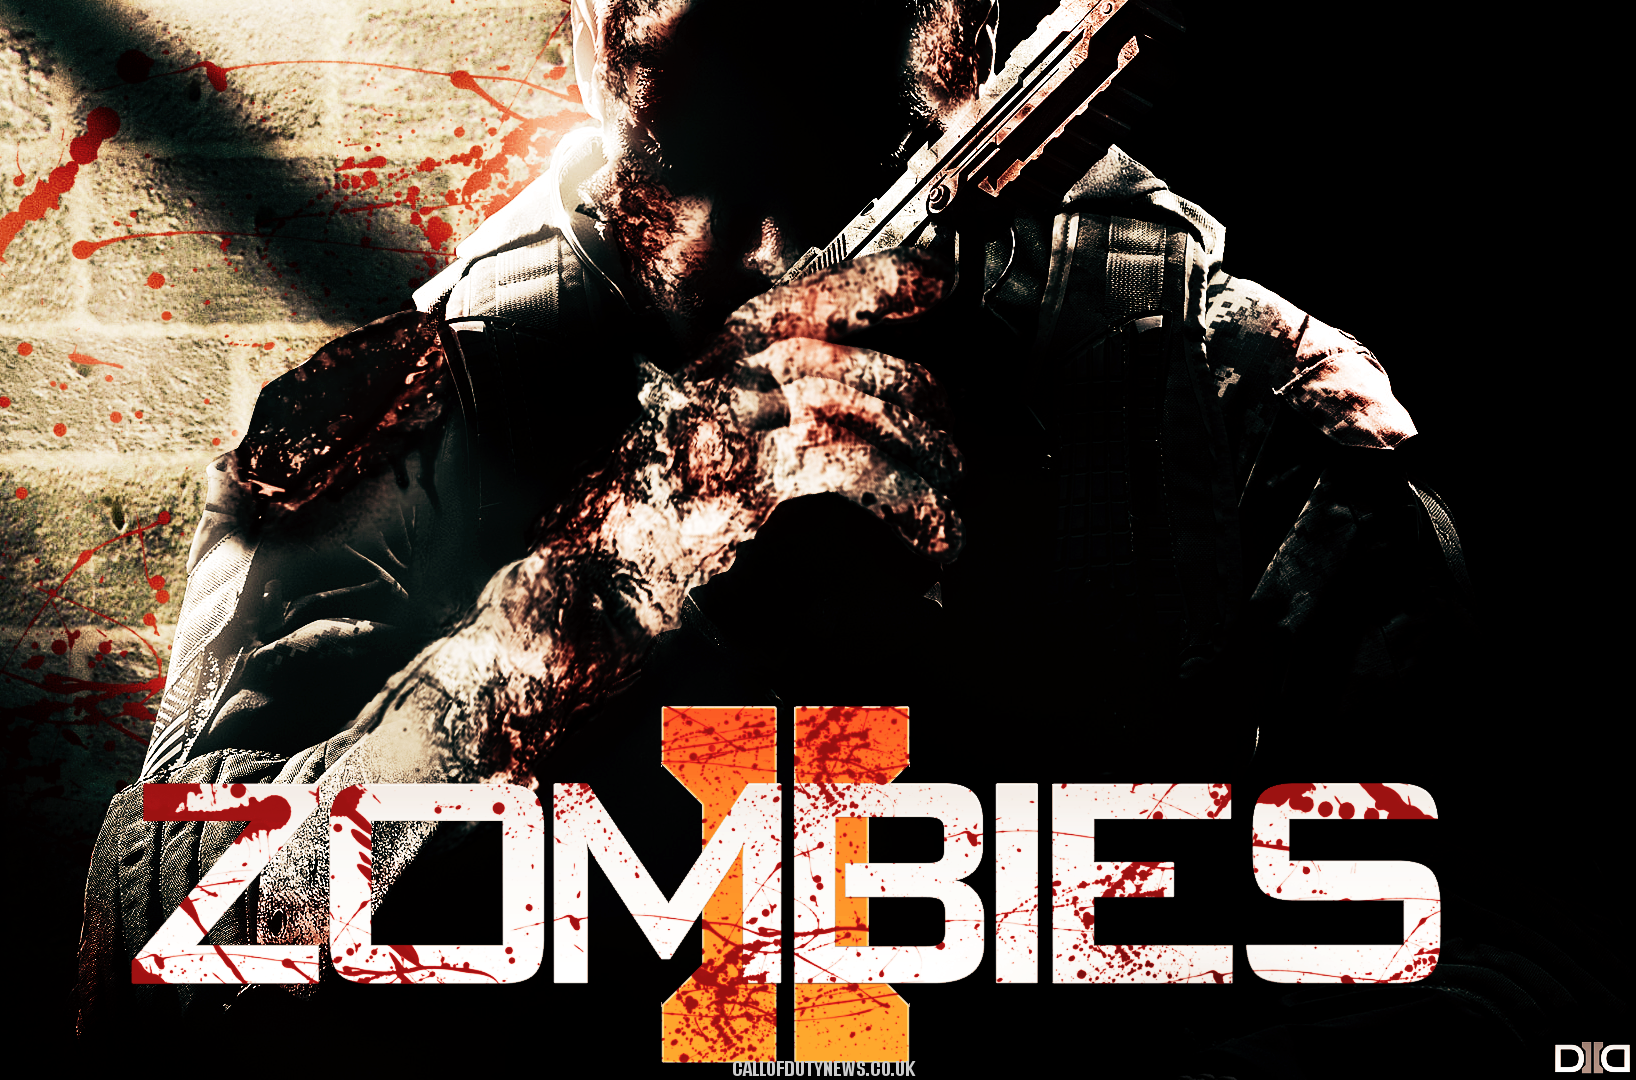 black ops 2 zombies free download mac